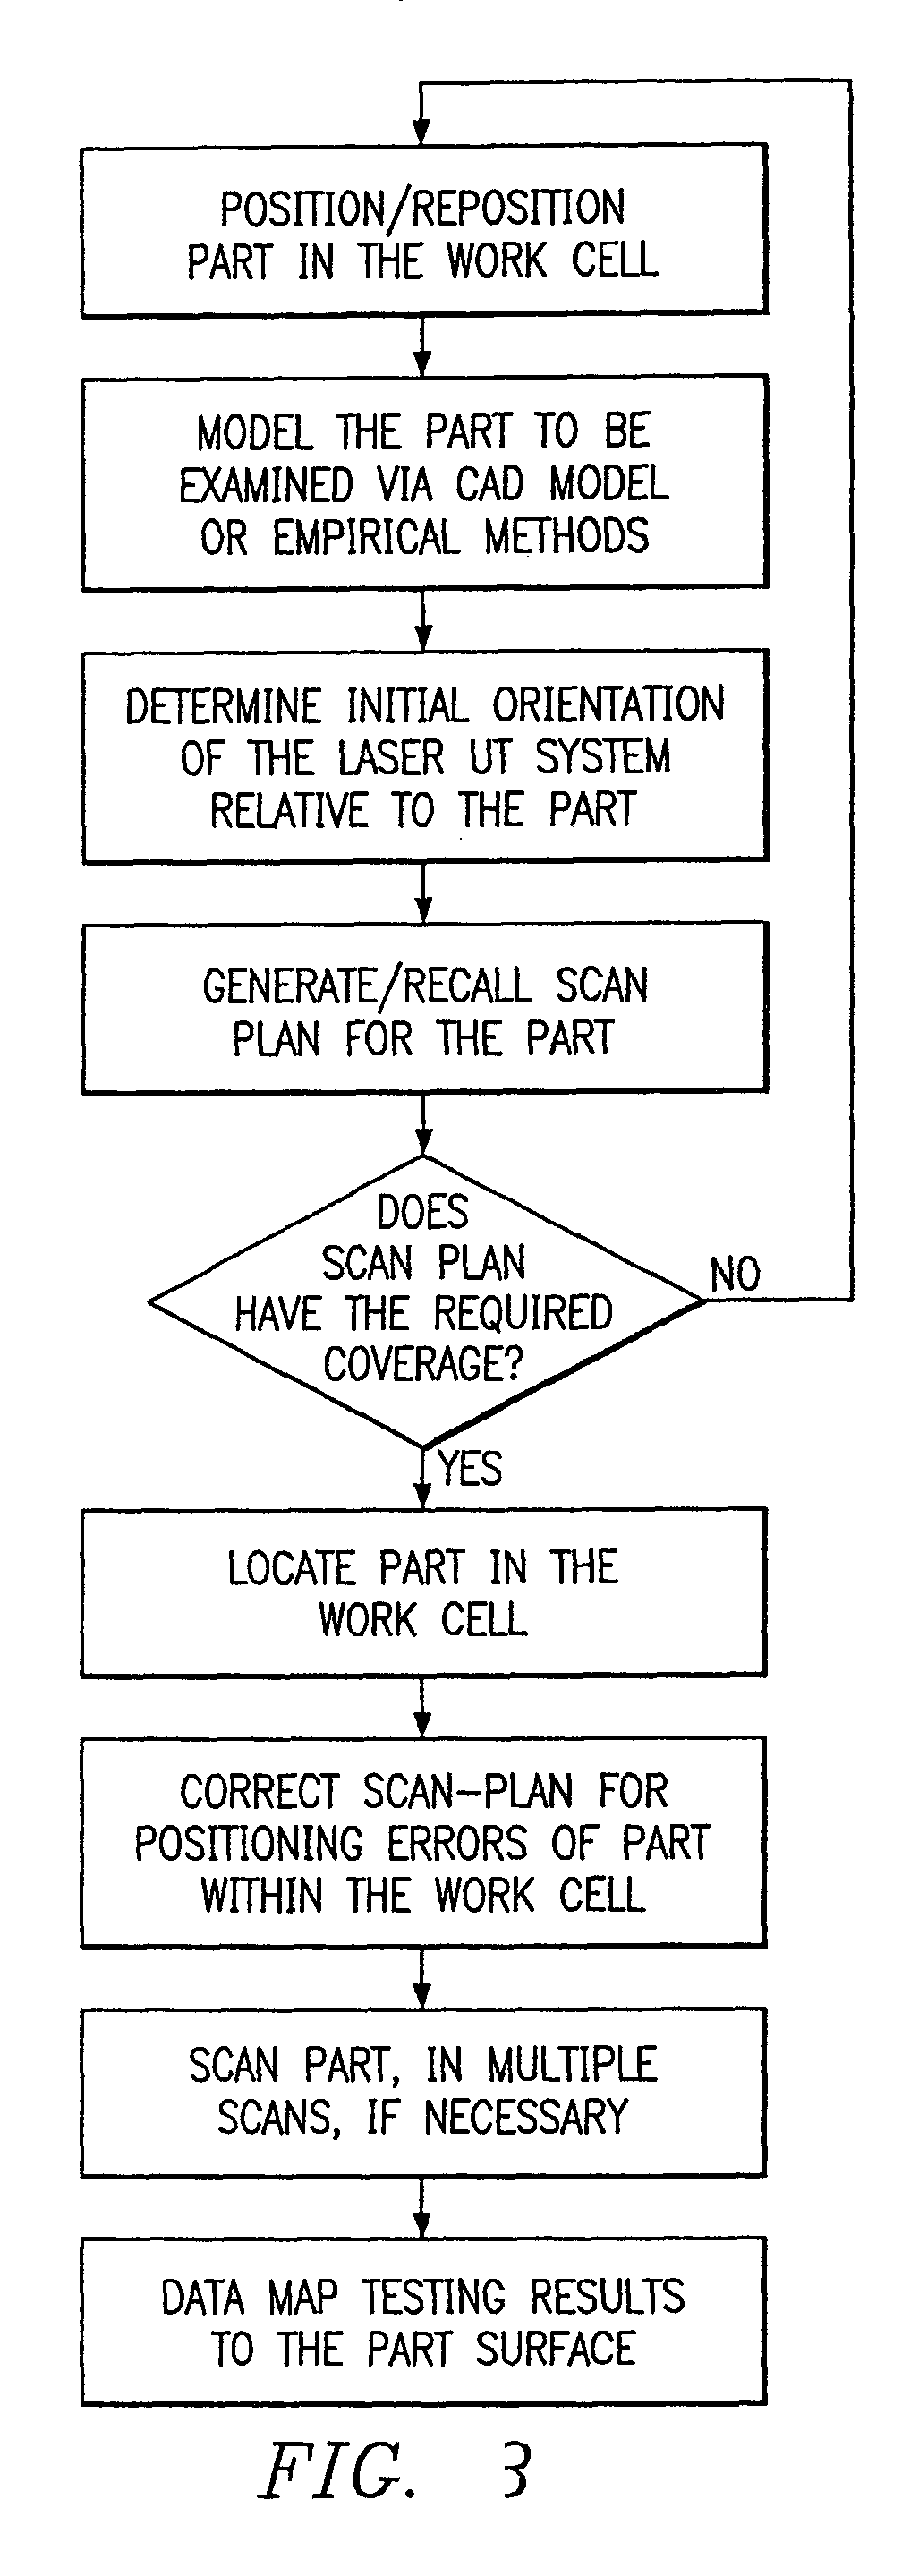 System and method for locating and positioning an ultrasonic signal generator for testing purposes